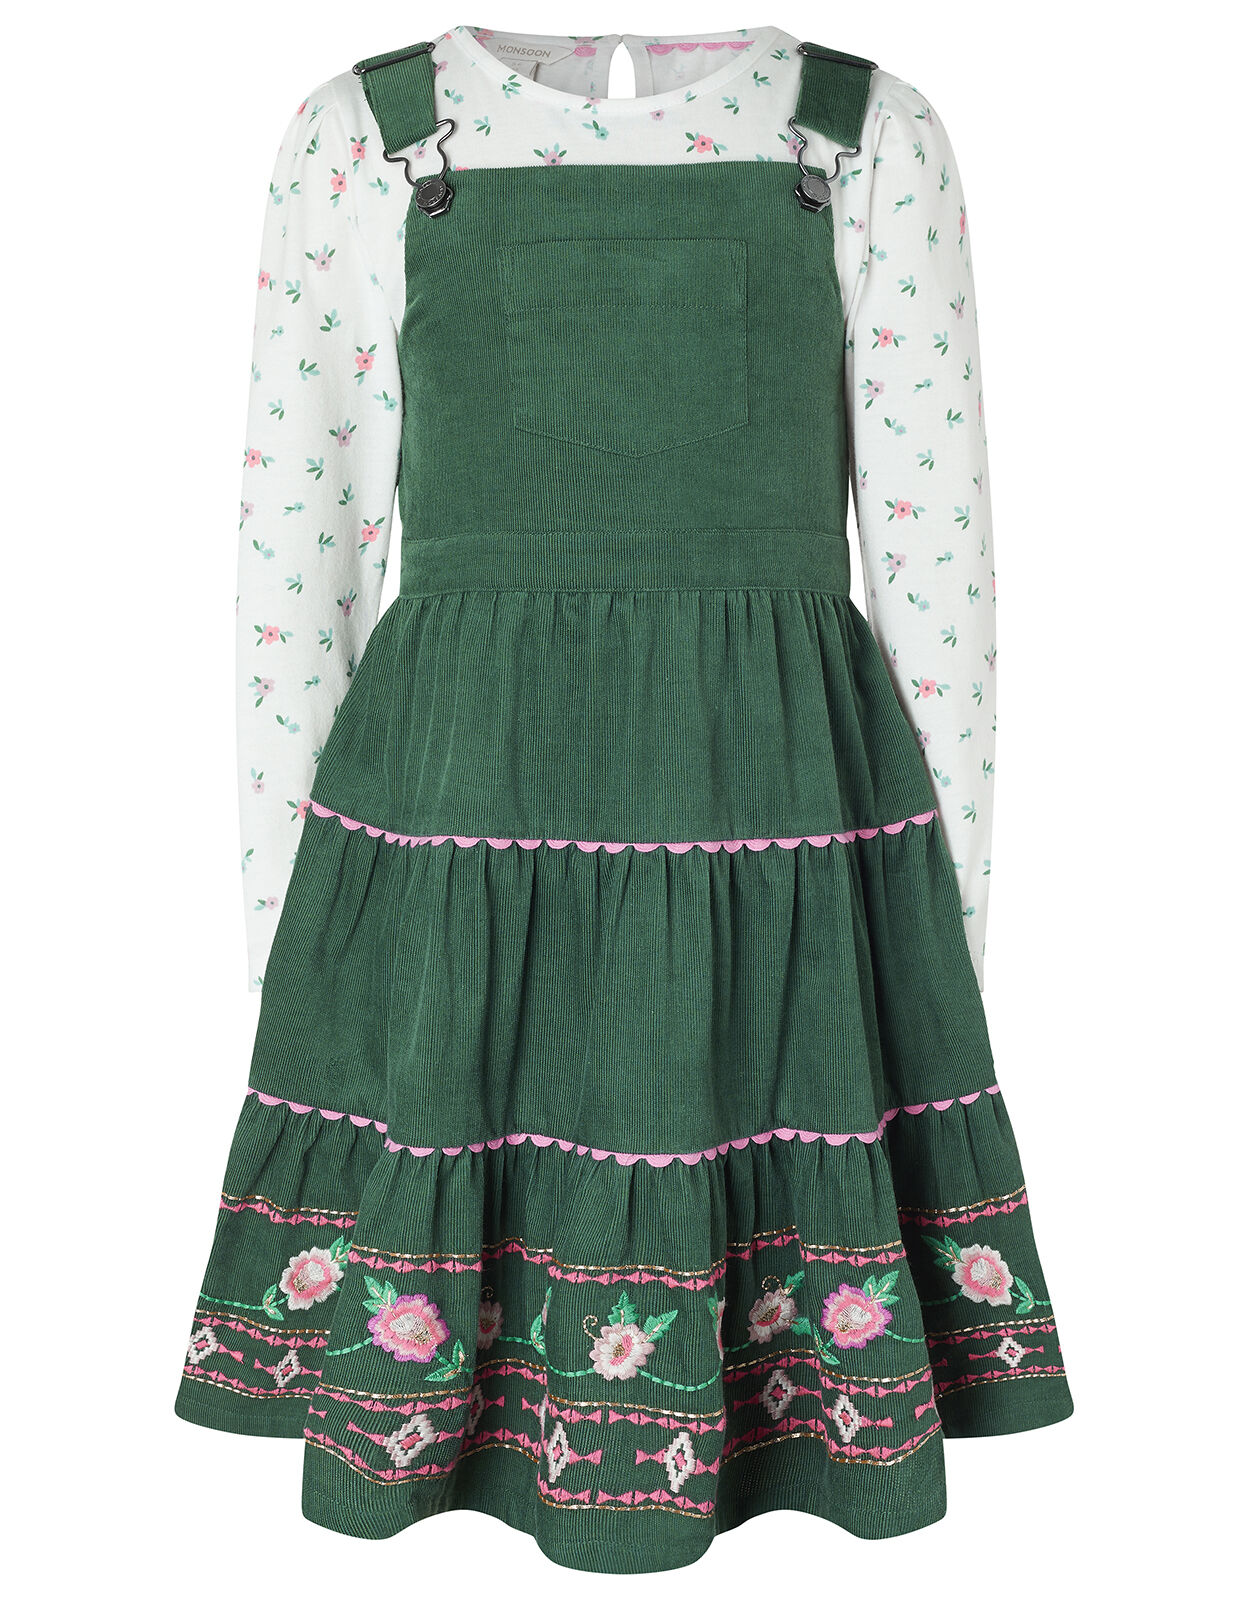 Embroidered Cord Pinafore Dress and Top ...